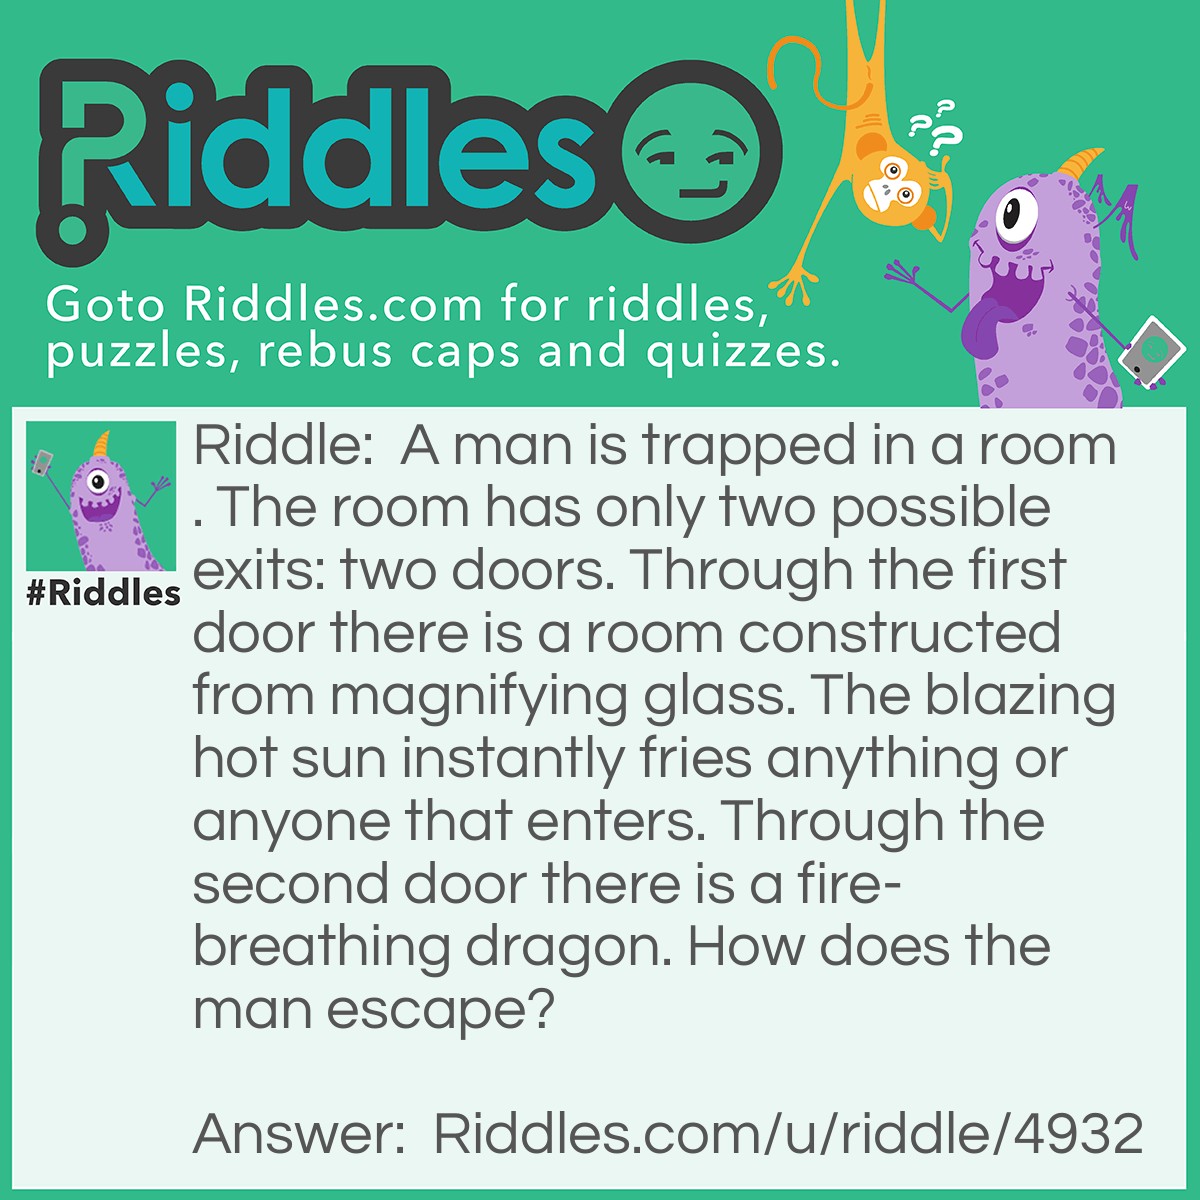 Riddle: A man is trapped in a room. The room has only two possible exits: two doors. Through the first door there is a room constructed from magnifying glass. The blazing hot sun instantly fries anything or anyone that enters. Through the second door there is a fire-breathing dragon. How does the man escape? Answer: He waits until night time for the sun to go away, then goes through the first door.